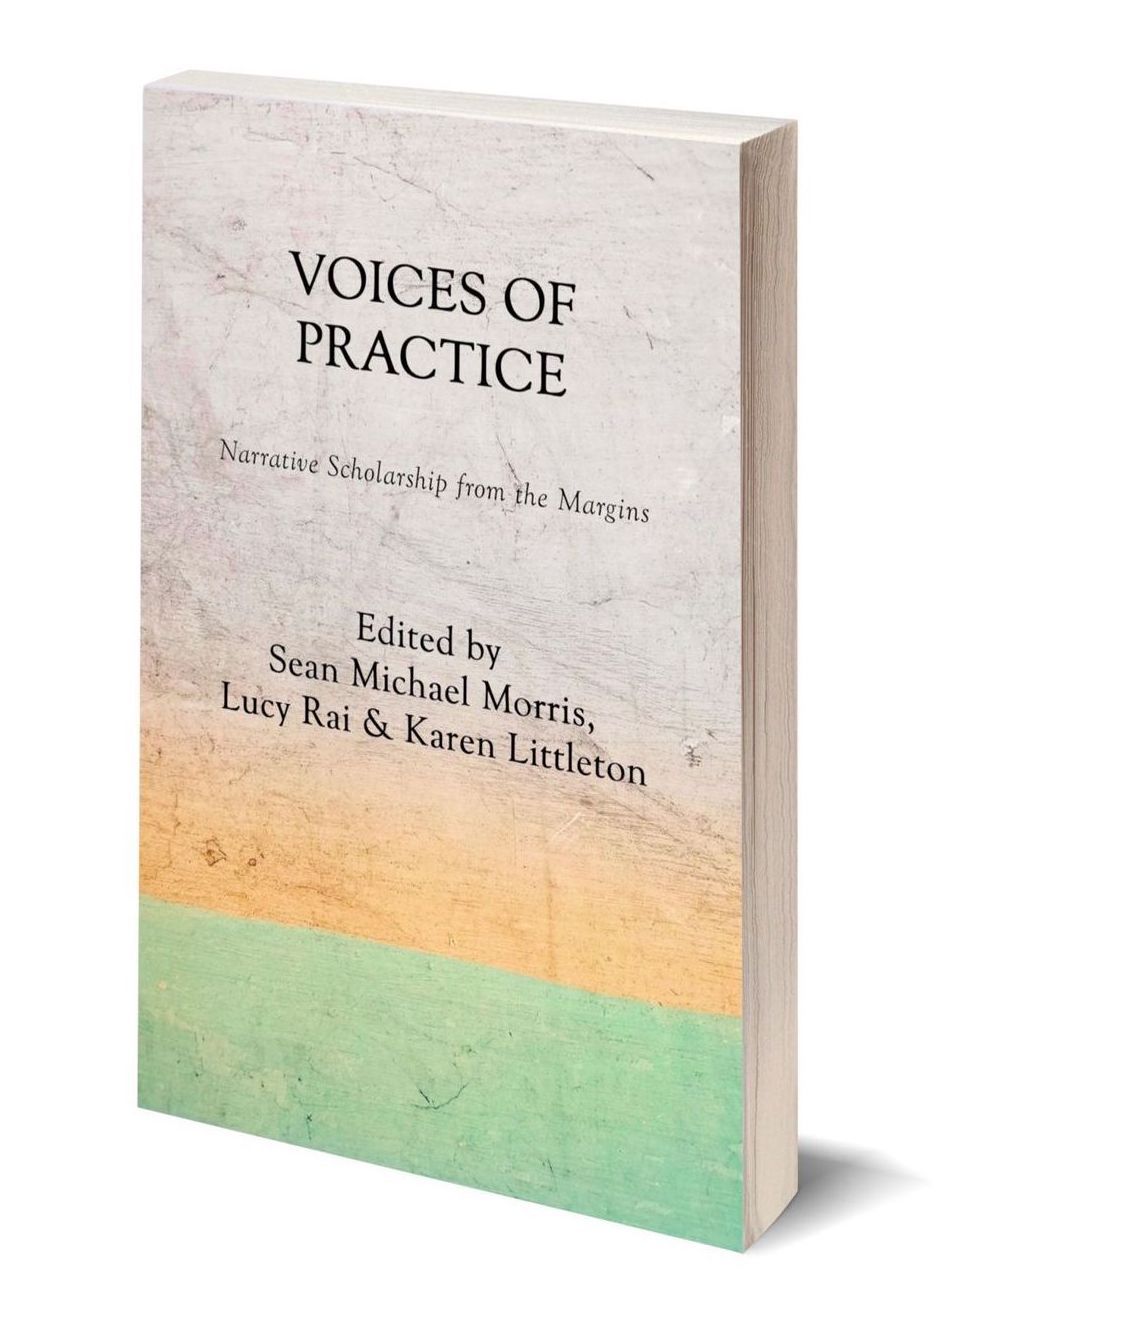 The cover of Voices of Practice with three colors tan, yellow, and green in stripes against a weathered page